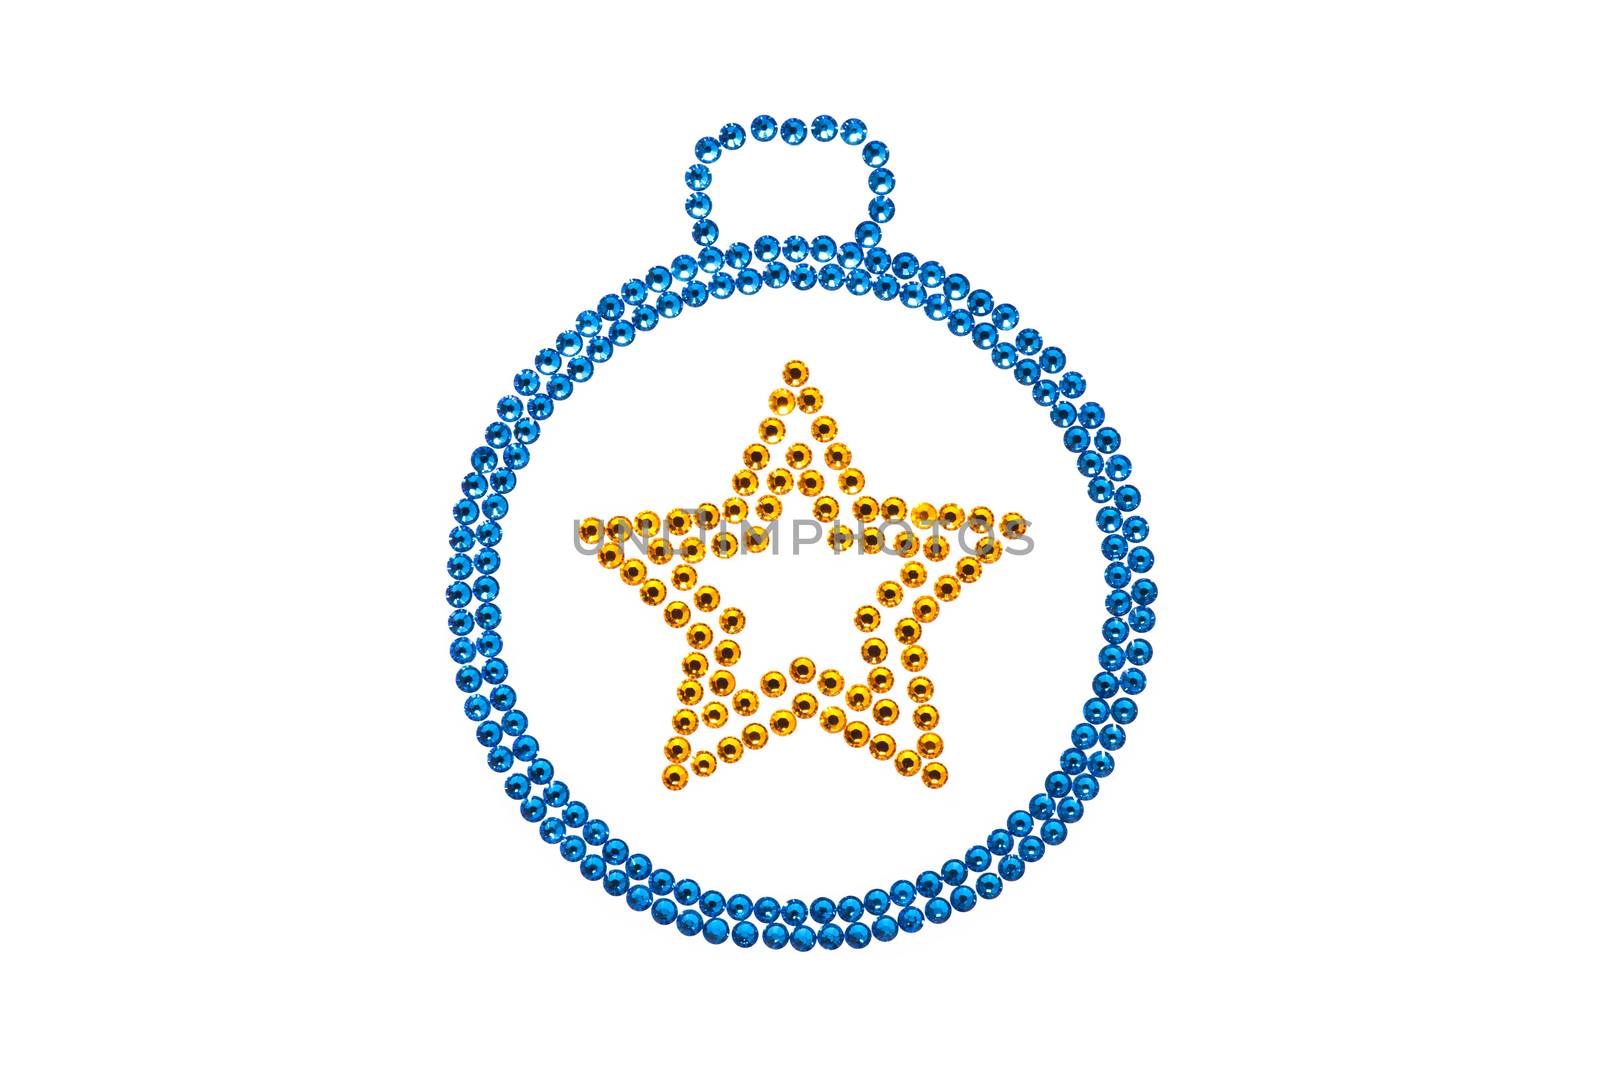 Bauble made of rhinestones blue yellow over white